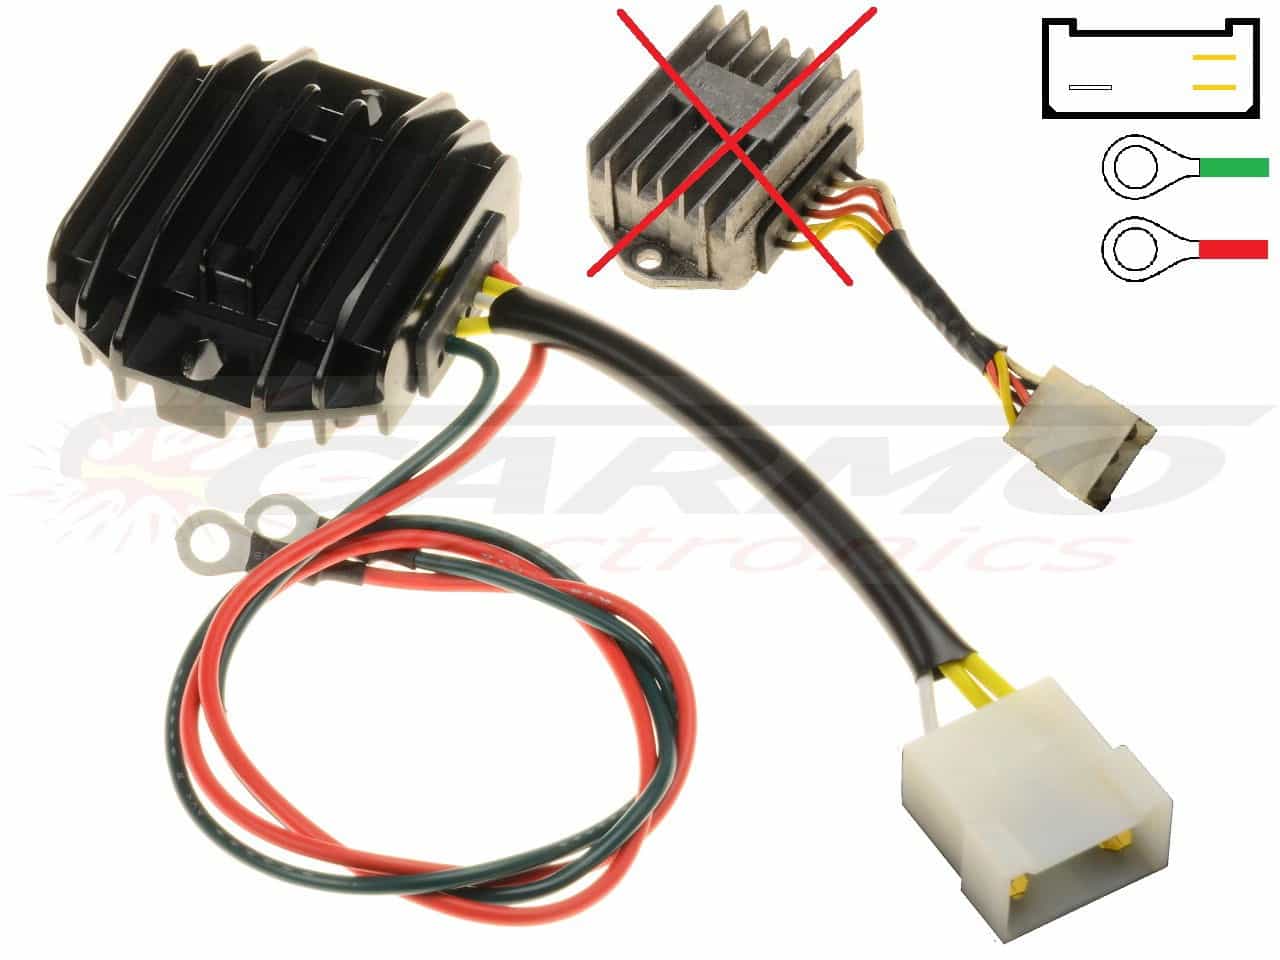 CARR512 Ducati Paso MOSFET Voltage regulator rectifier - Click Image to Close